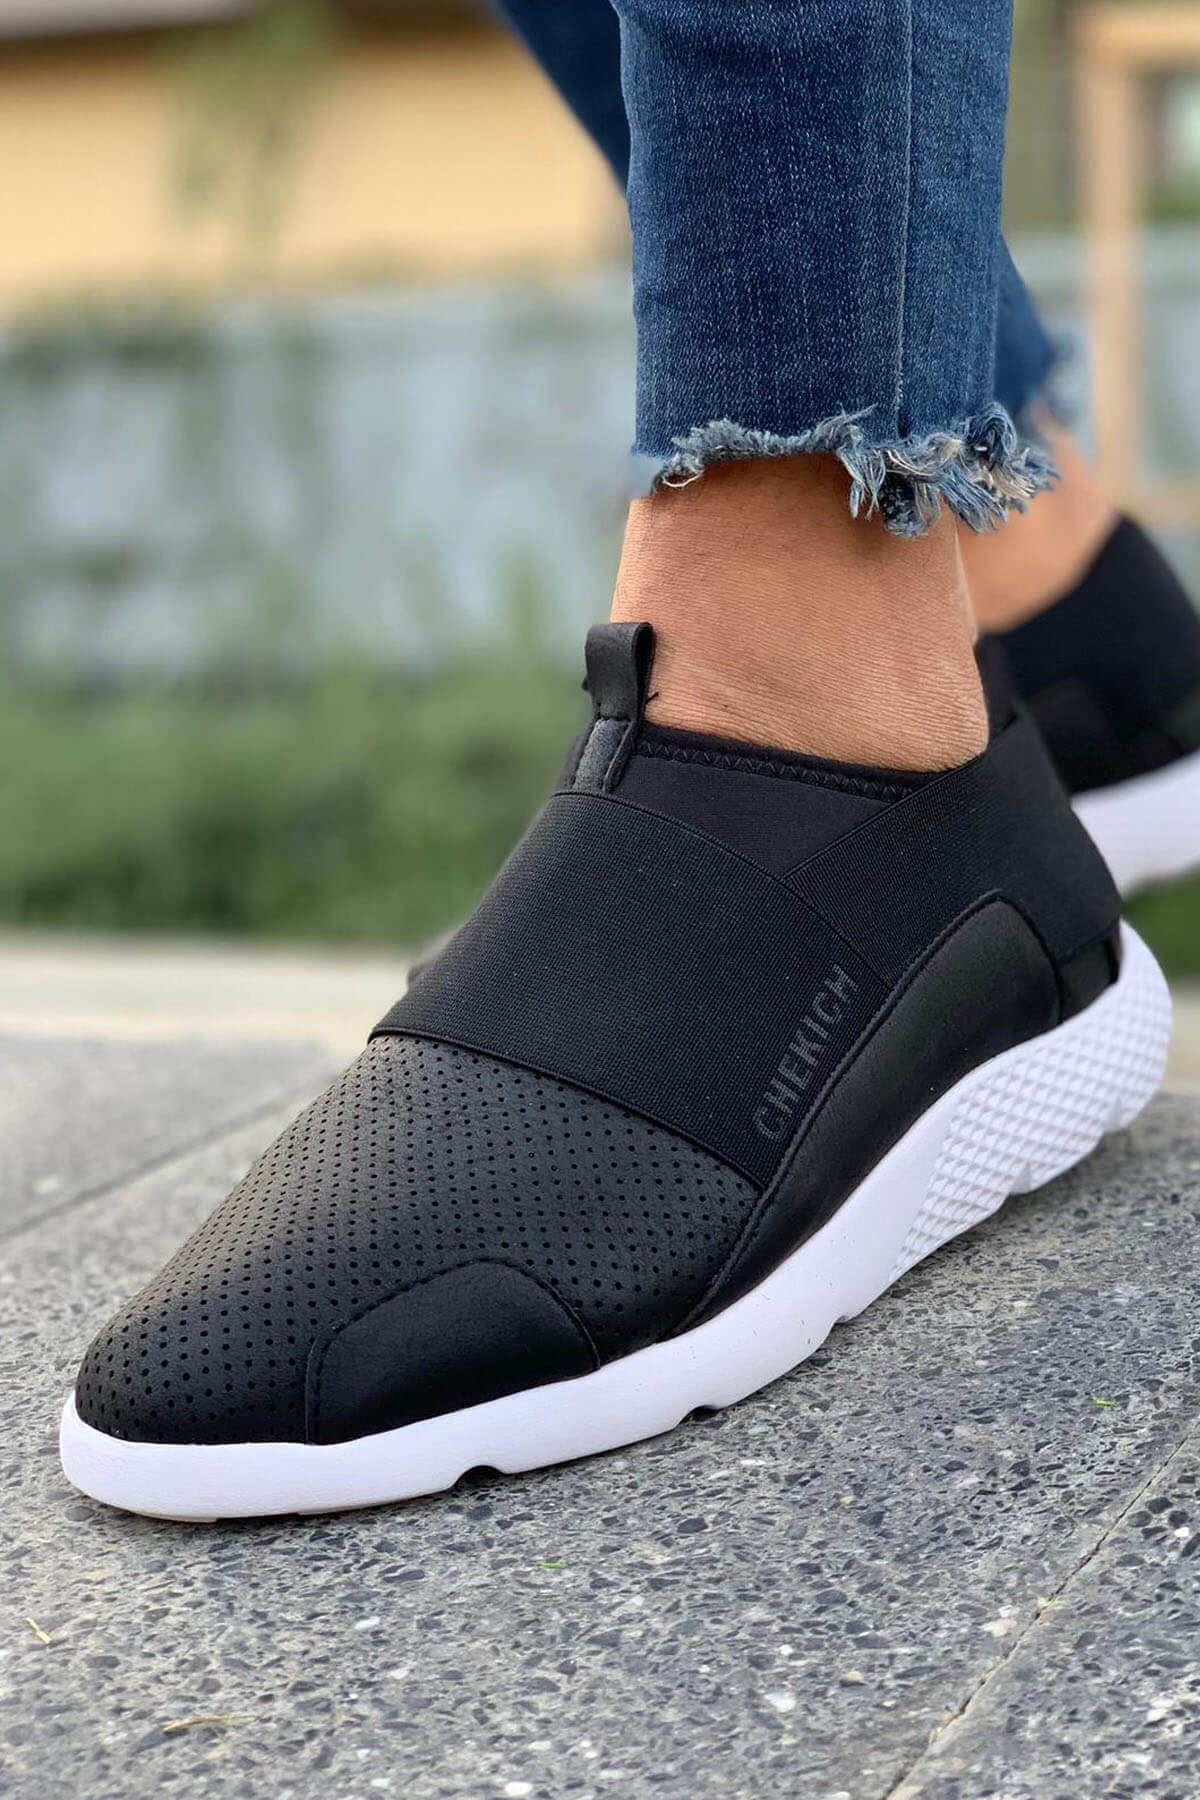 Chekich Men's Shoes Black Color Slip On Summer Season Breathable Casual Sport Air Lightweight Gym Odorless Sneakers Comfortable Fashion Training Workout Walking Camping Beach Water Daily Footwear CH035